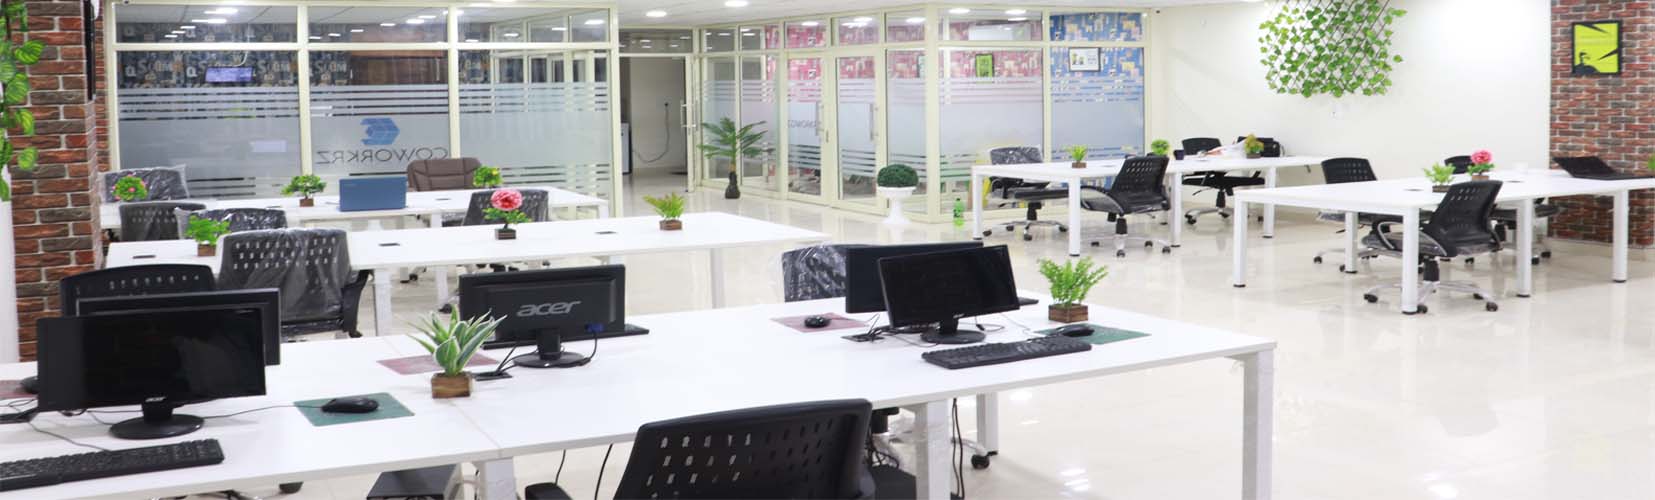 coworking space shared office space delhi benefits